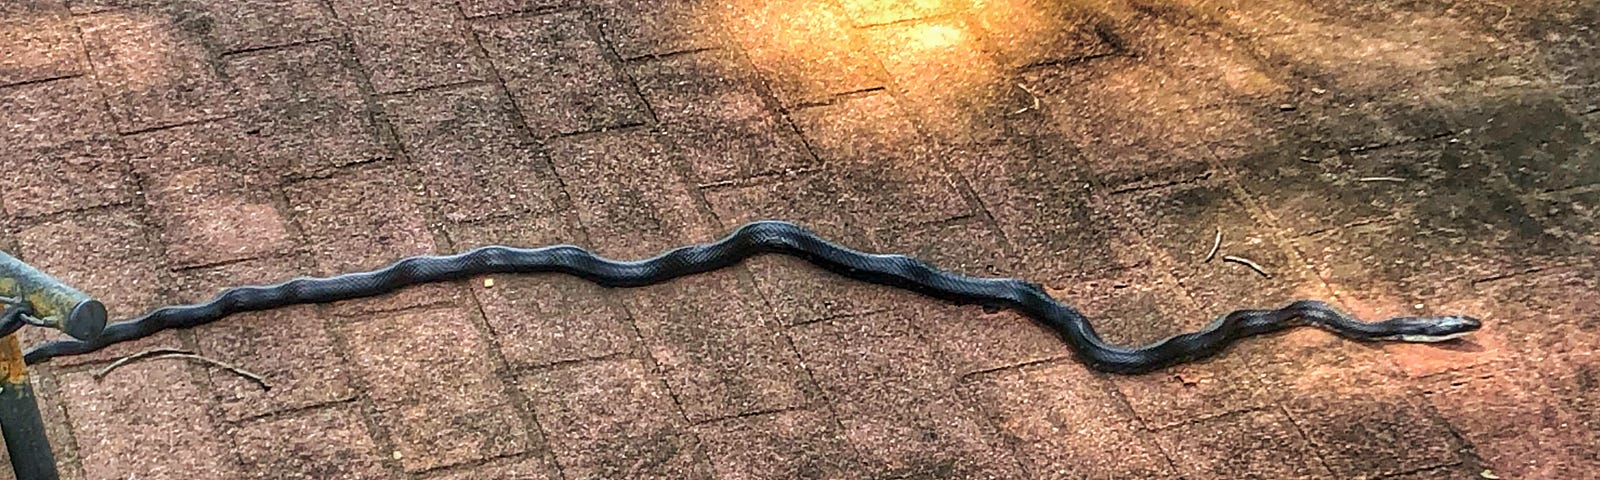 A black snake that visited my yard